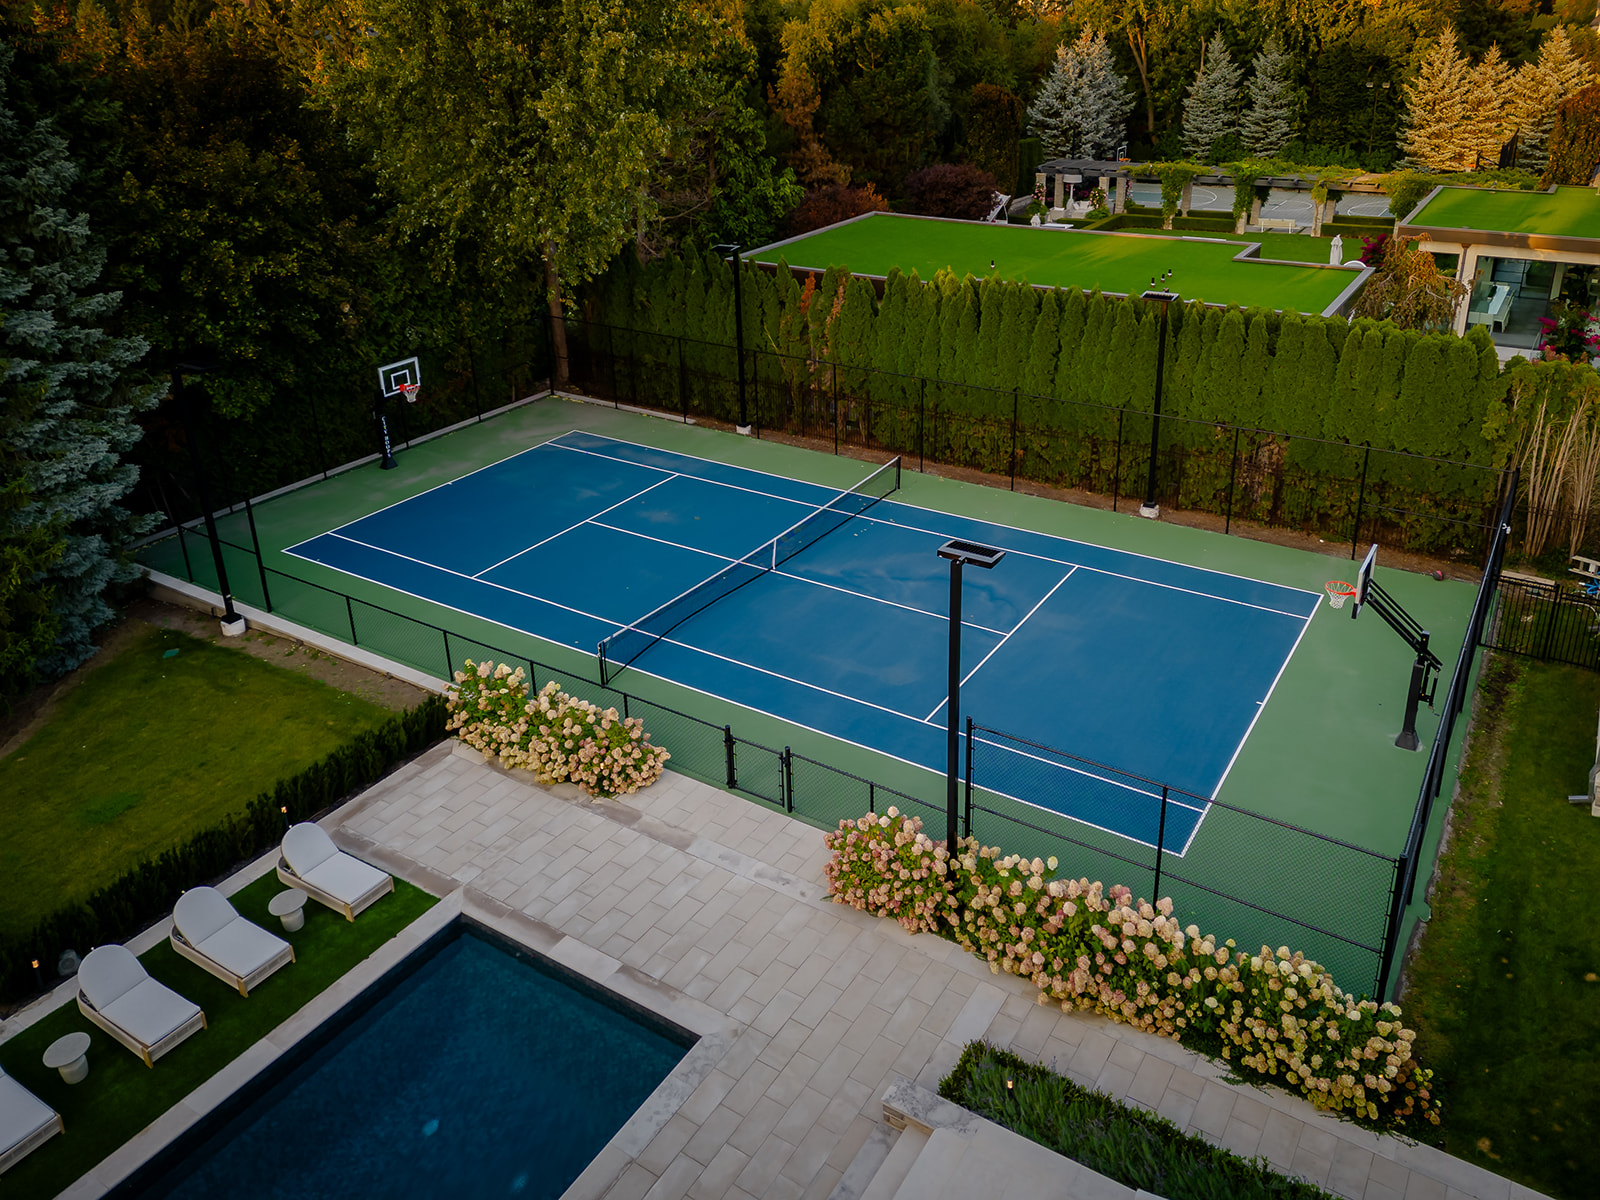 A drone shot of the backyard with the tennis court.